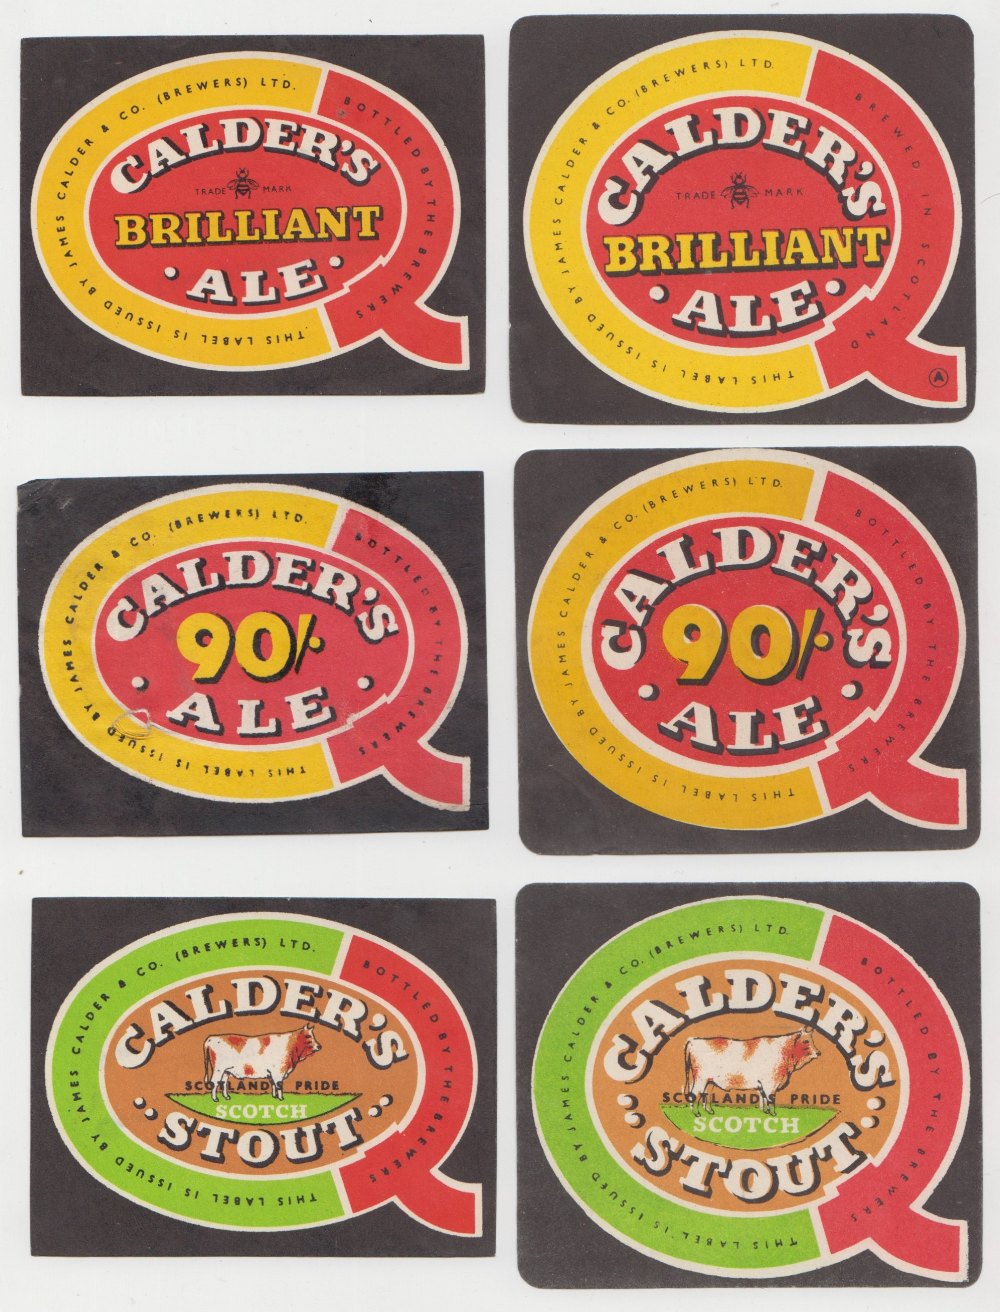 Beer labels, James Calder & Co (Brewers) Ltd, Scotland, a collection of 18 different horizontal